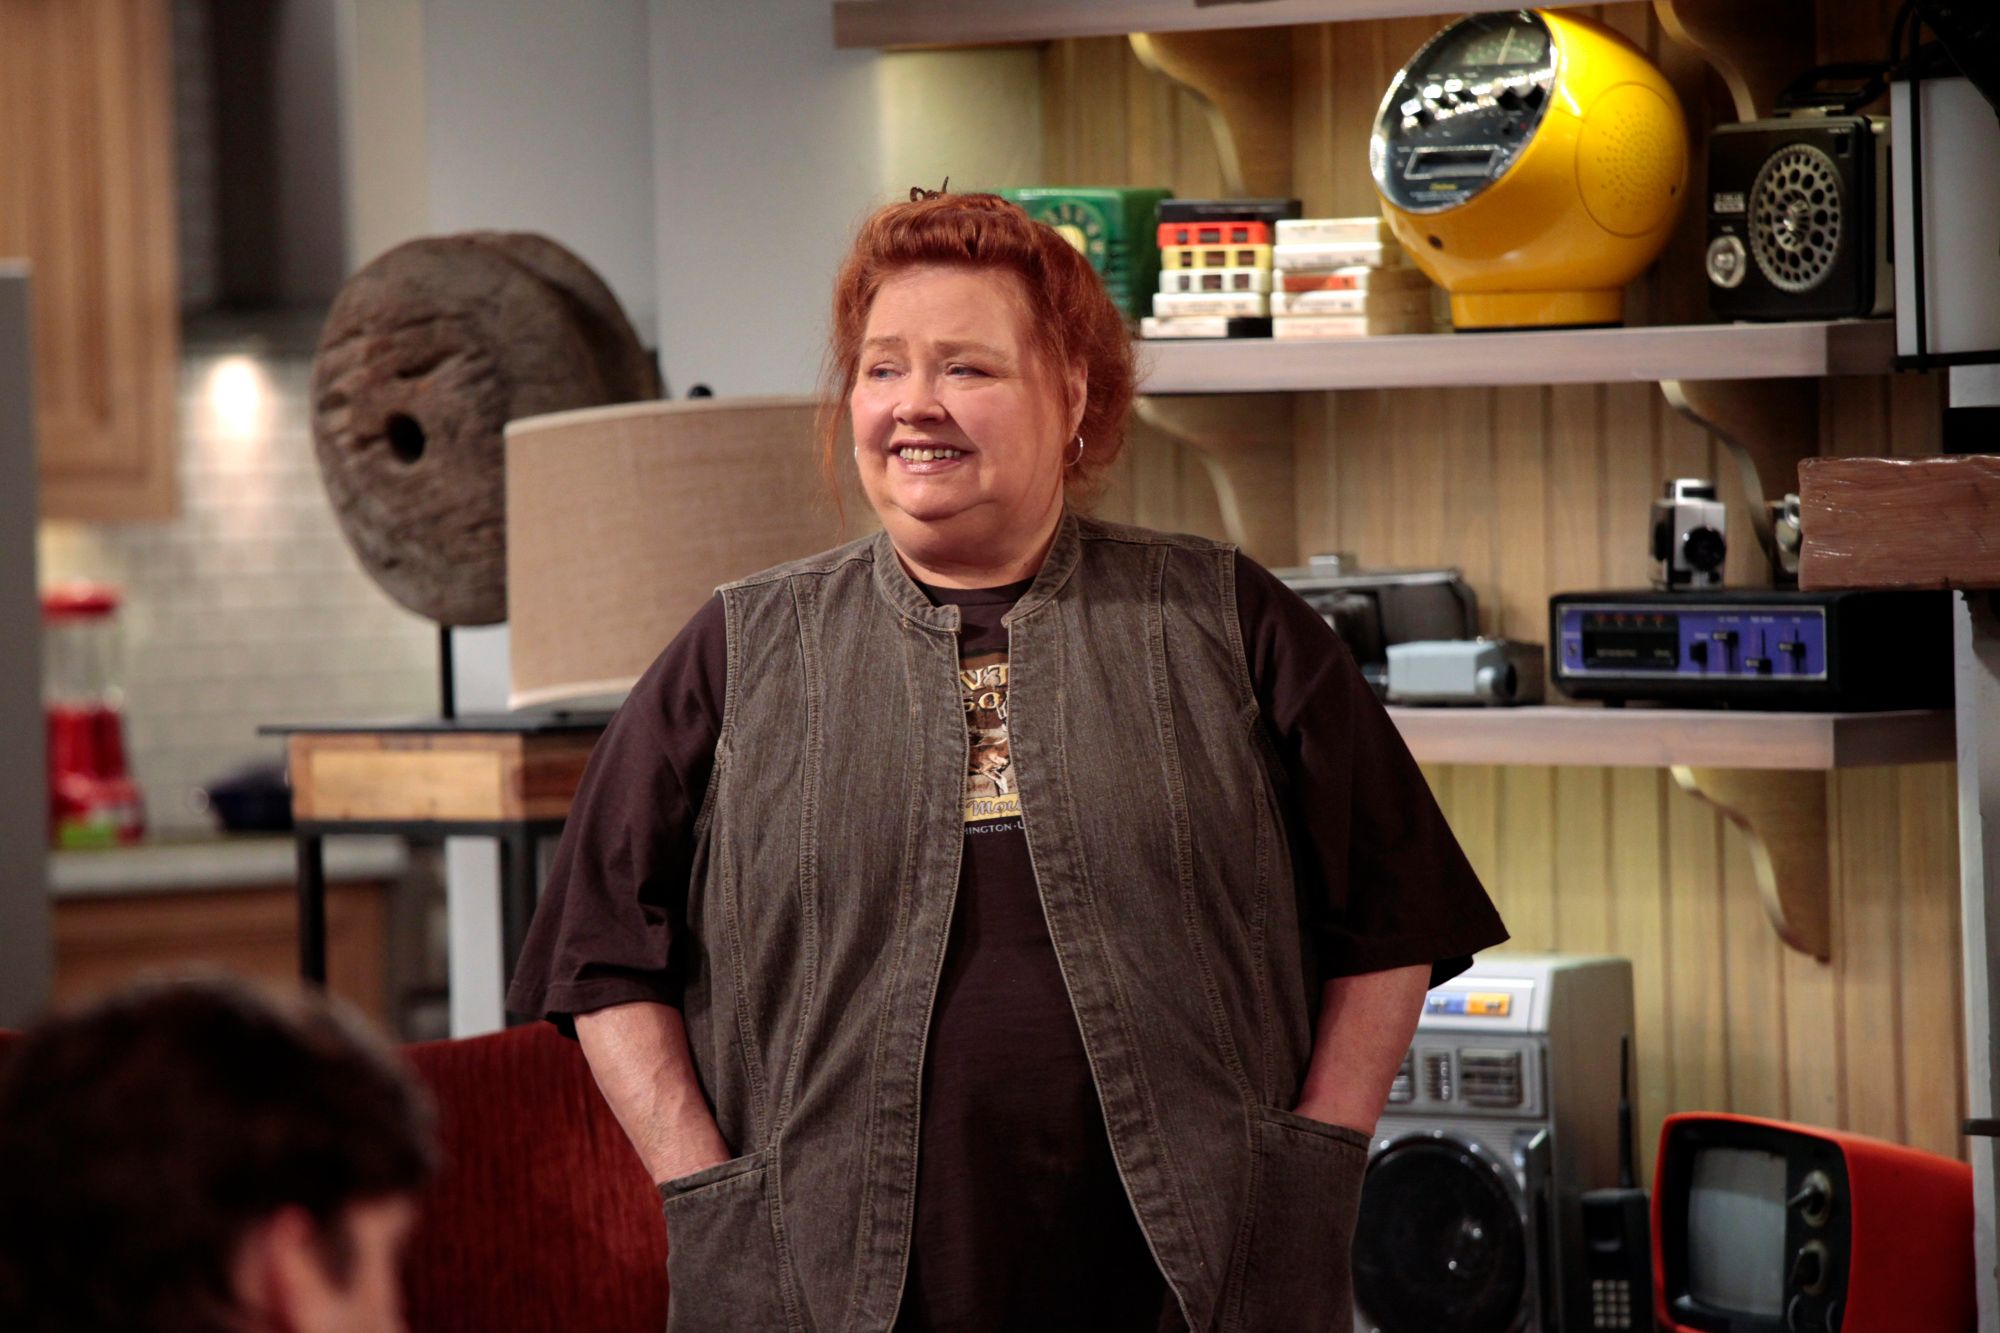 Conchata Ferrell in the finale episode of "Two and a Half Men" in May 2012 | Source: Getty Images